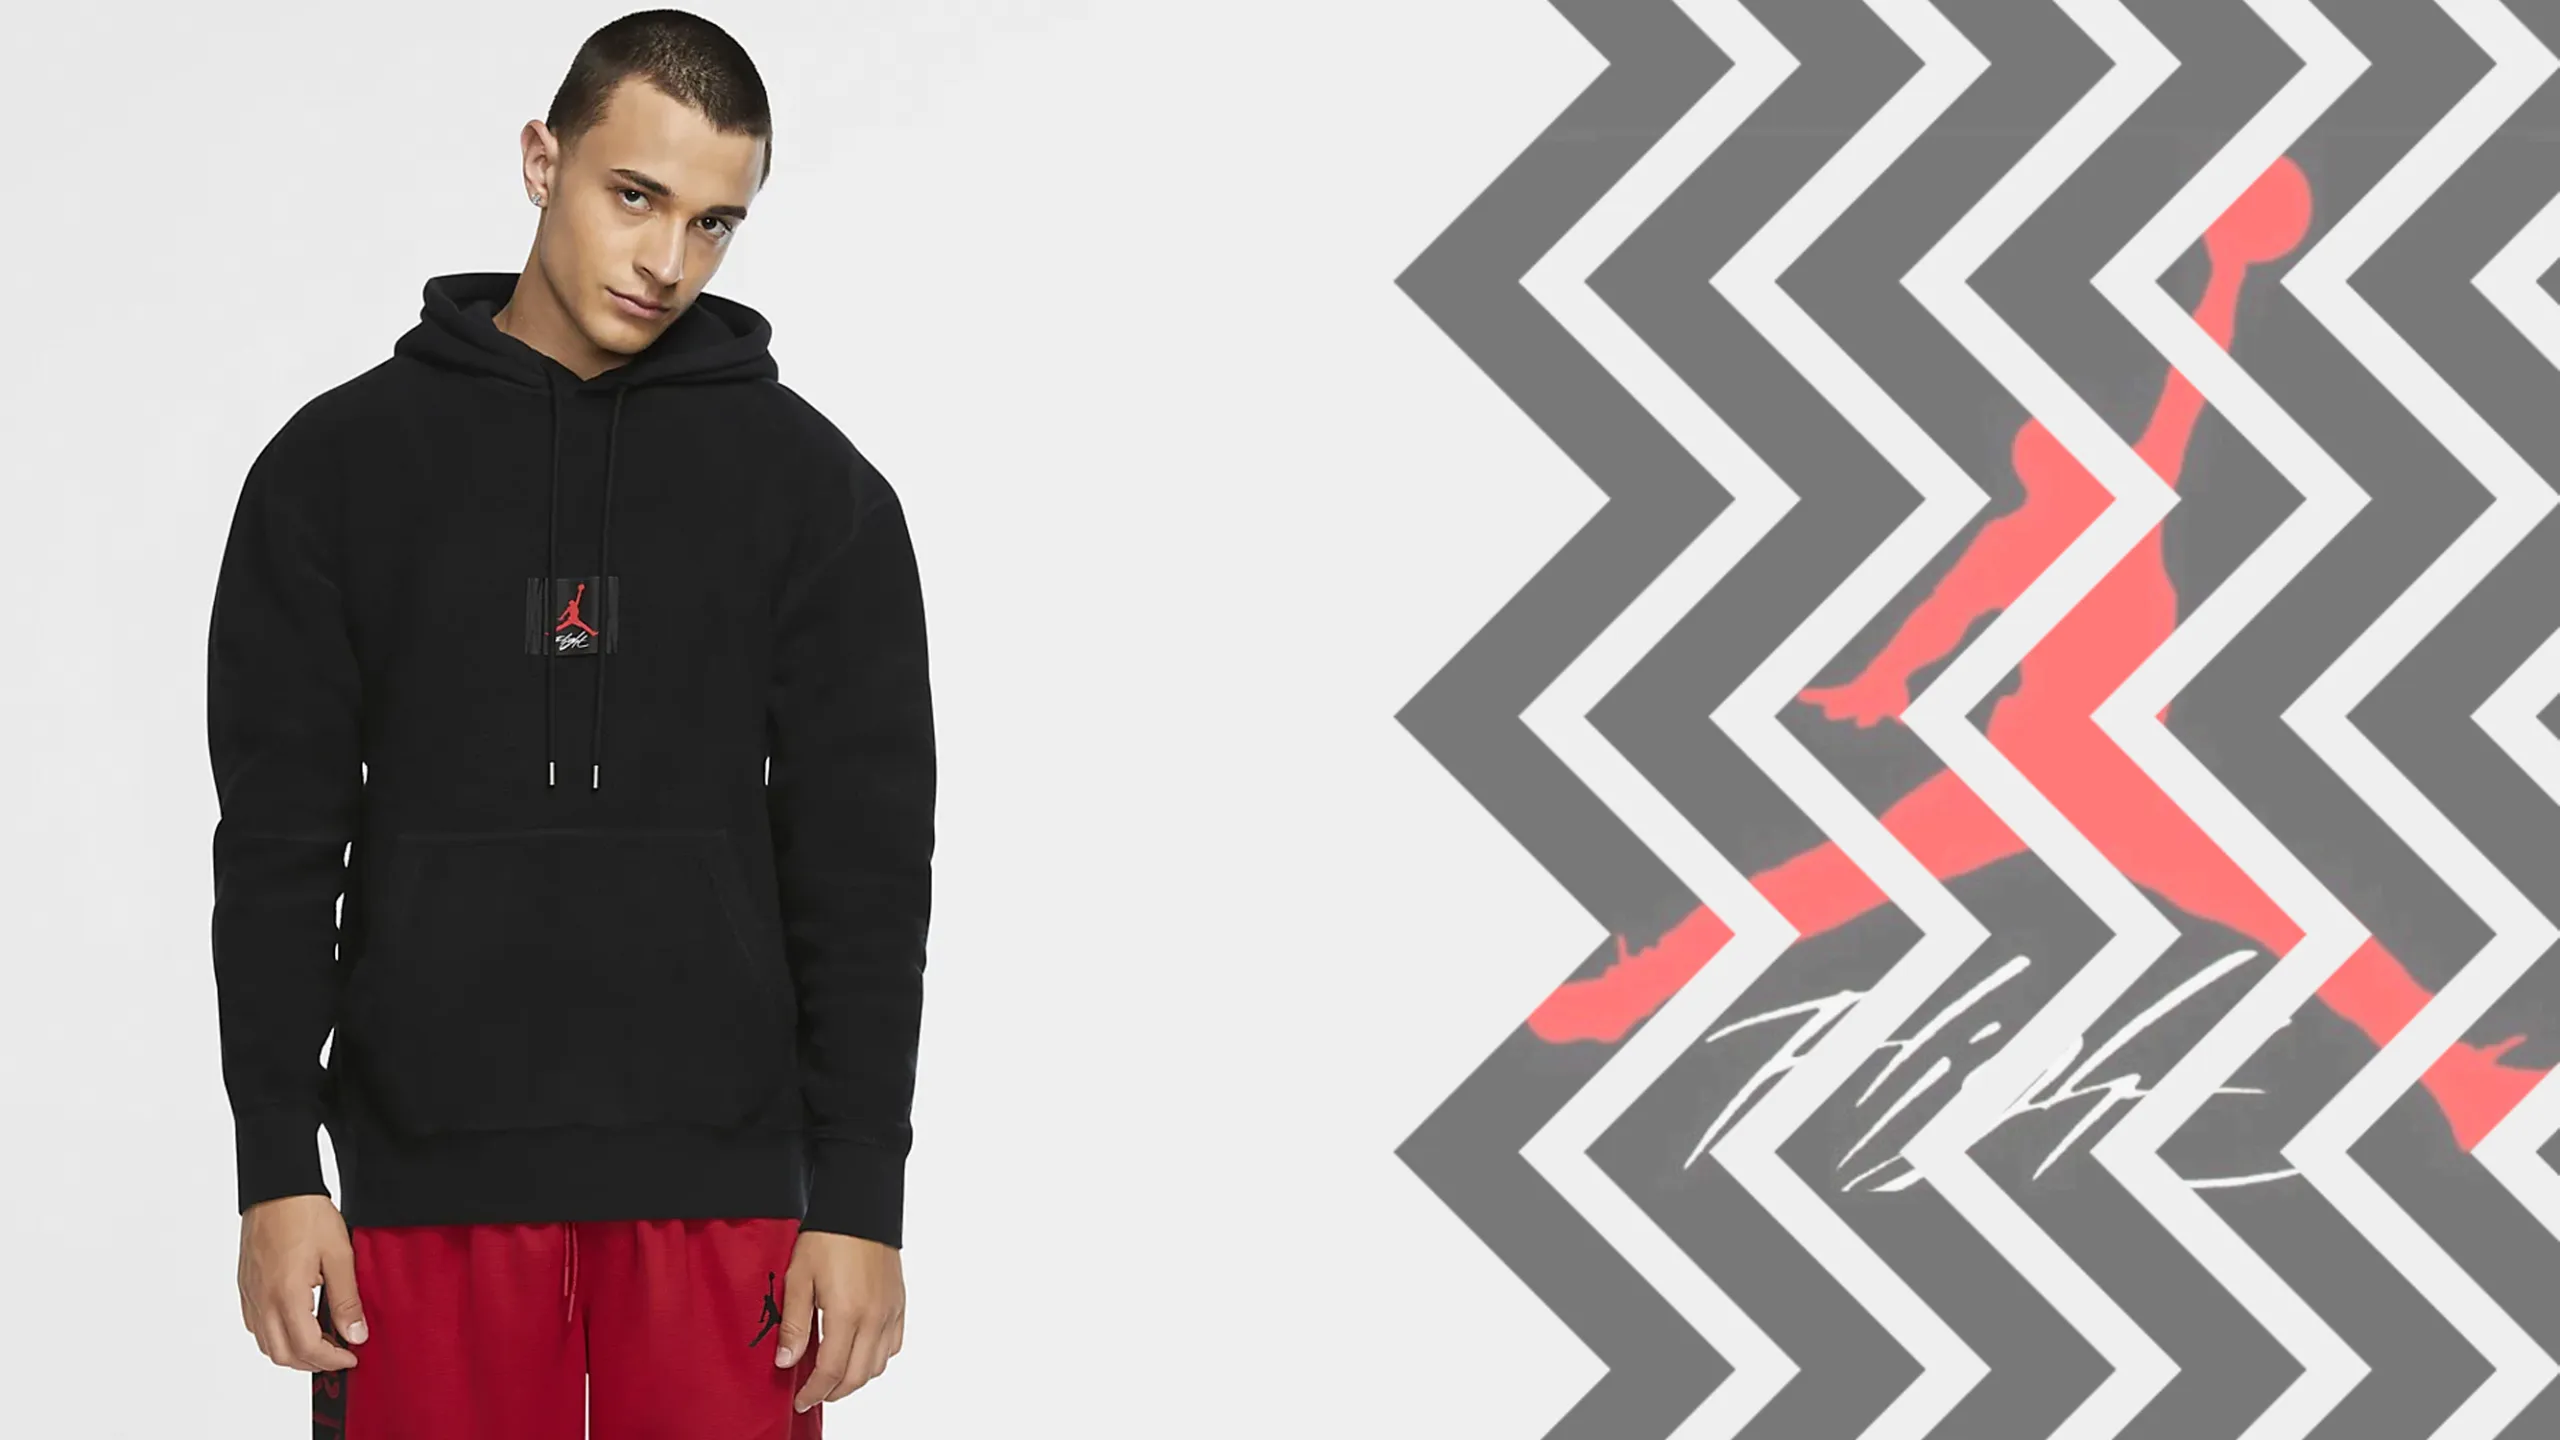 The Nike Air Jordan Flight Apparel Collection is Available Now | The ...